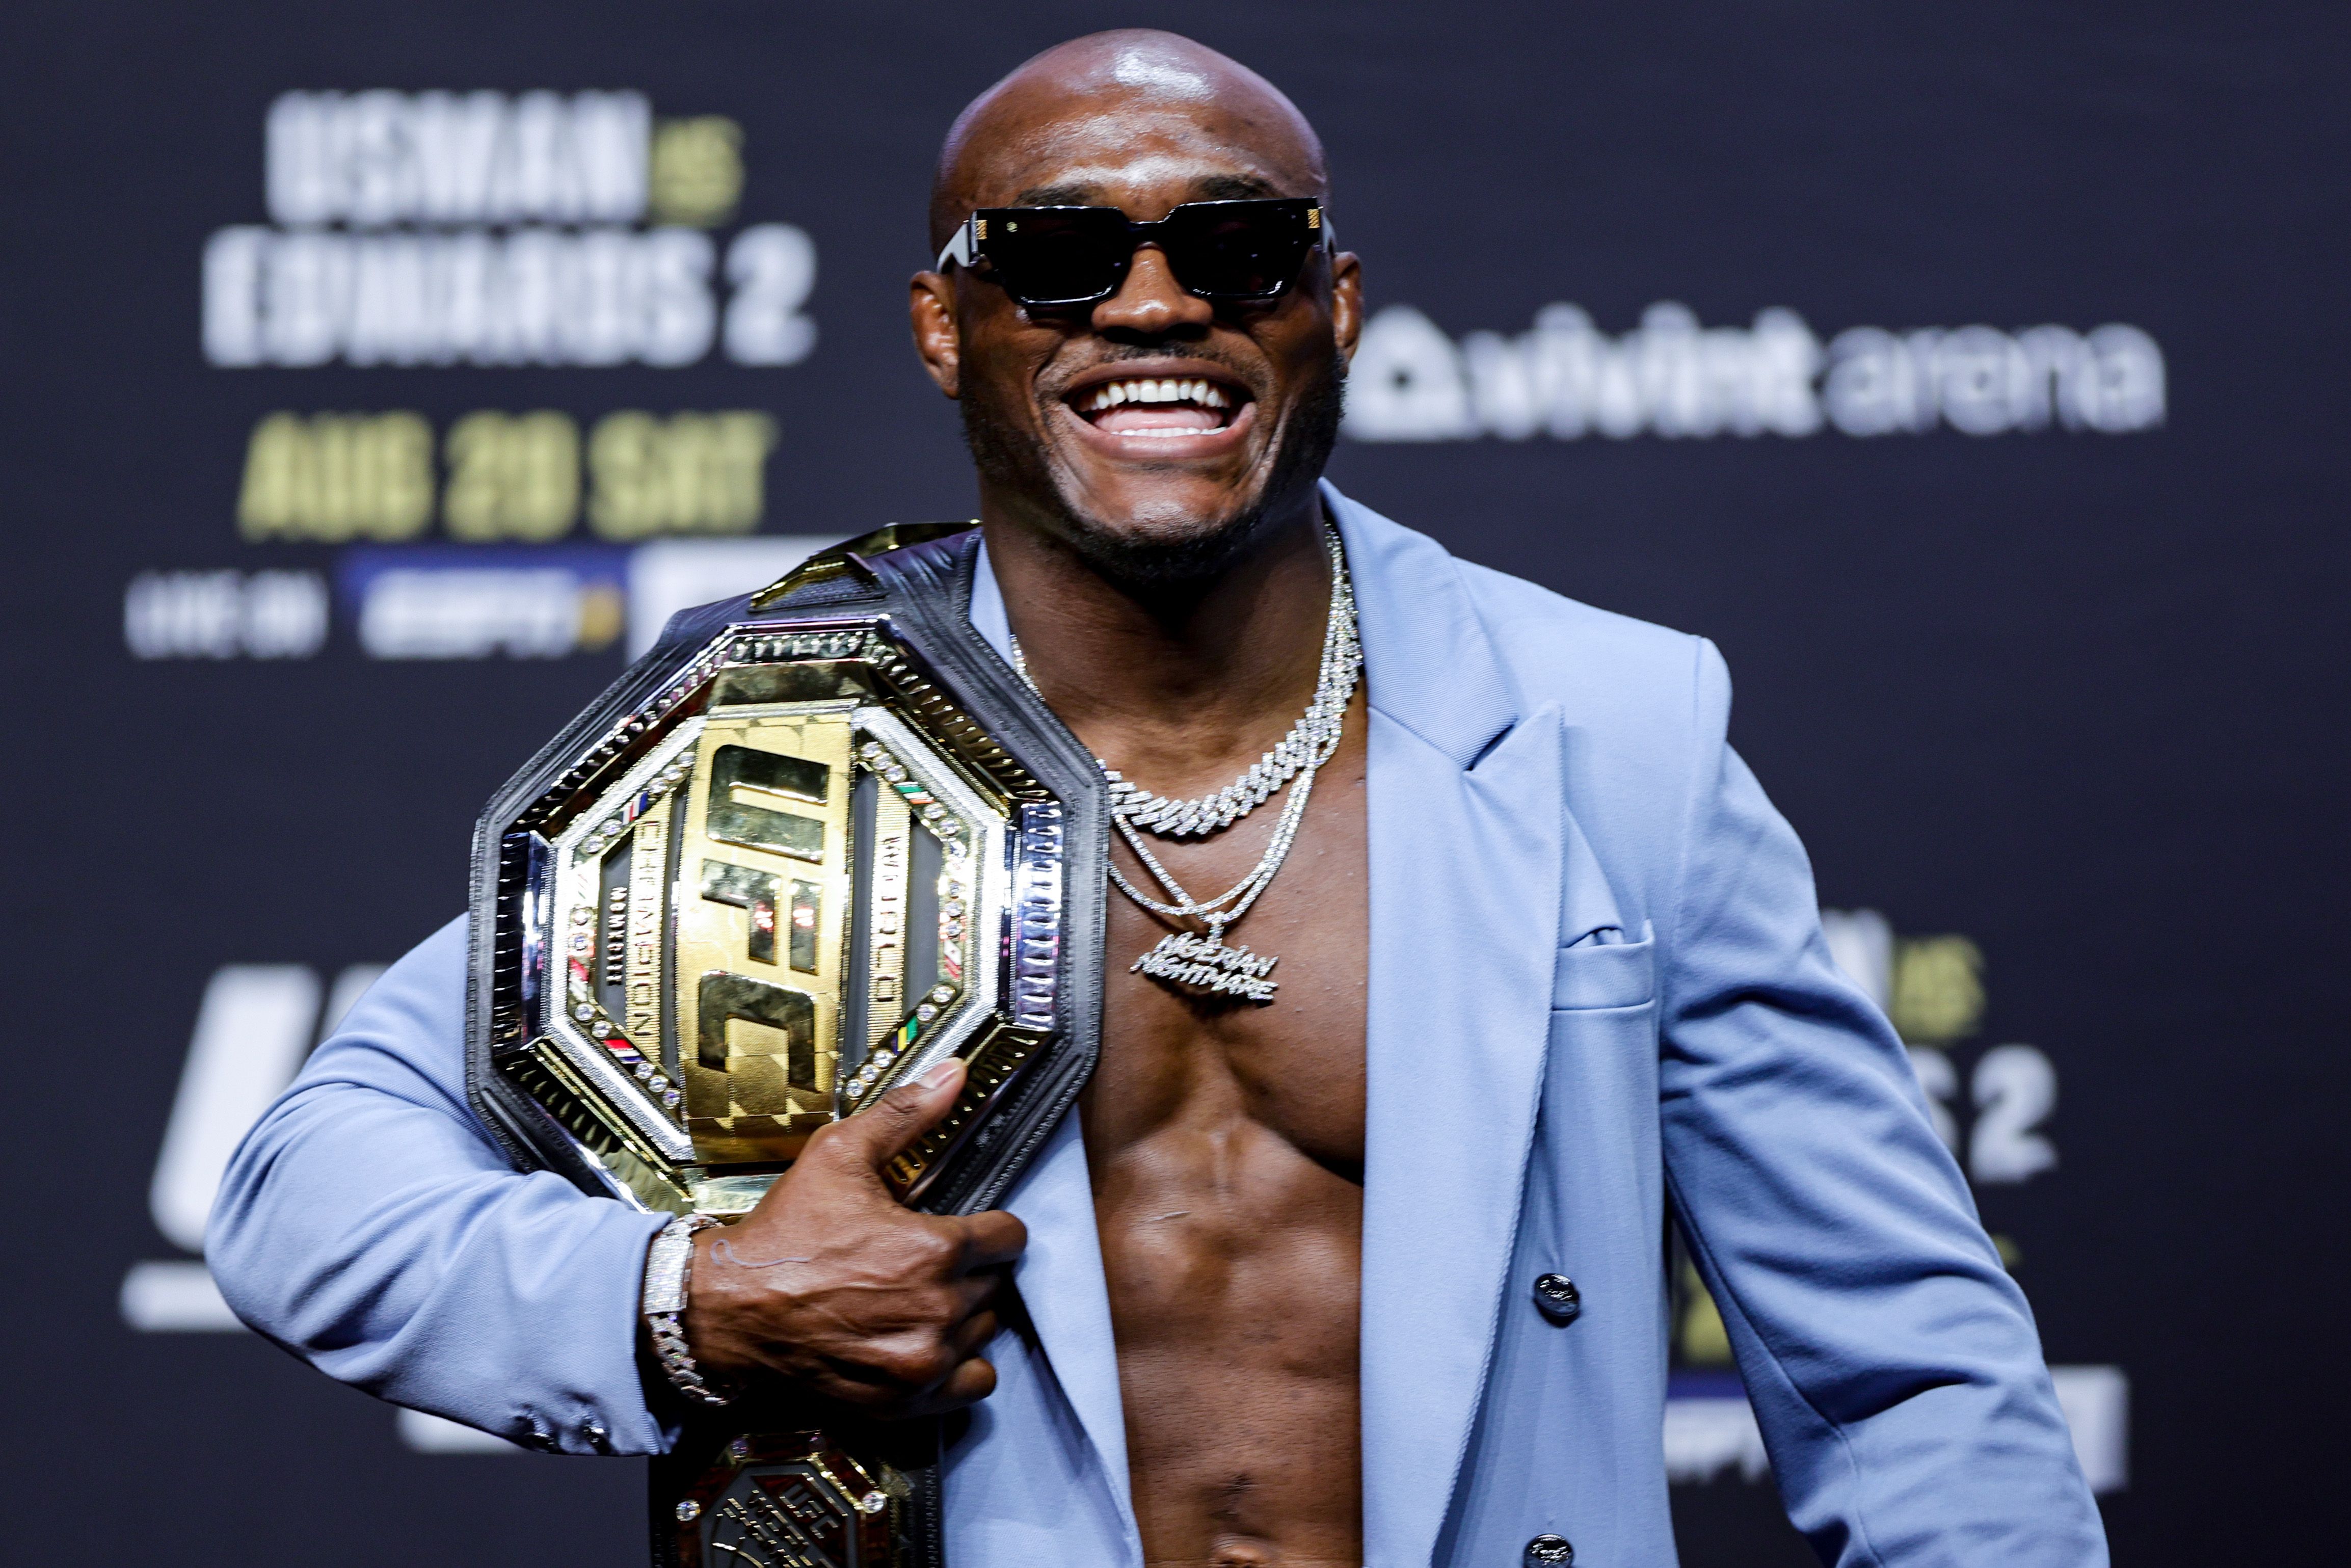 Kamaru Usman is seen on stage during the UFC 276 ceremonial weigh-in